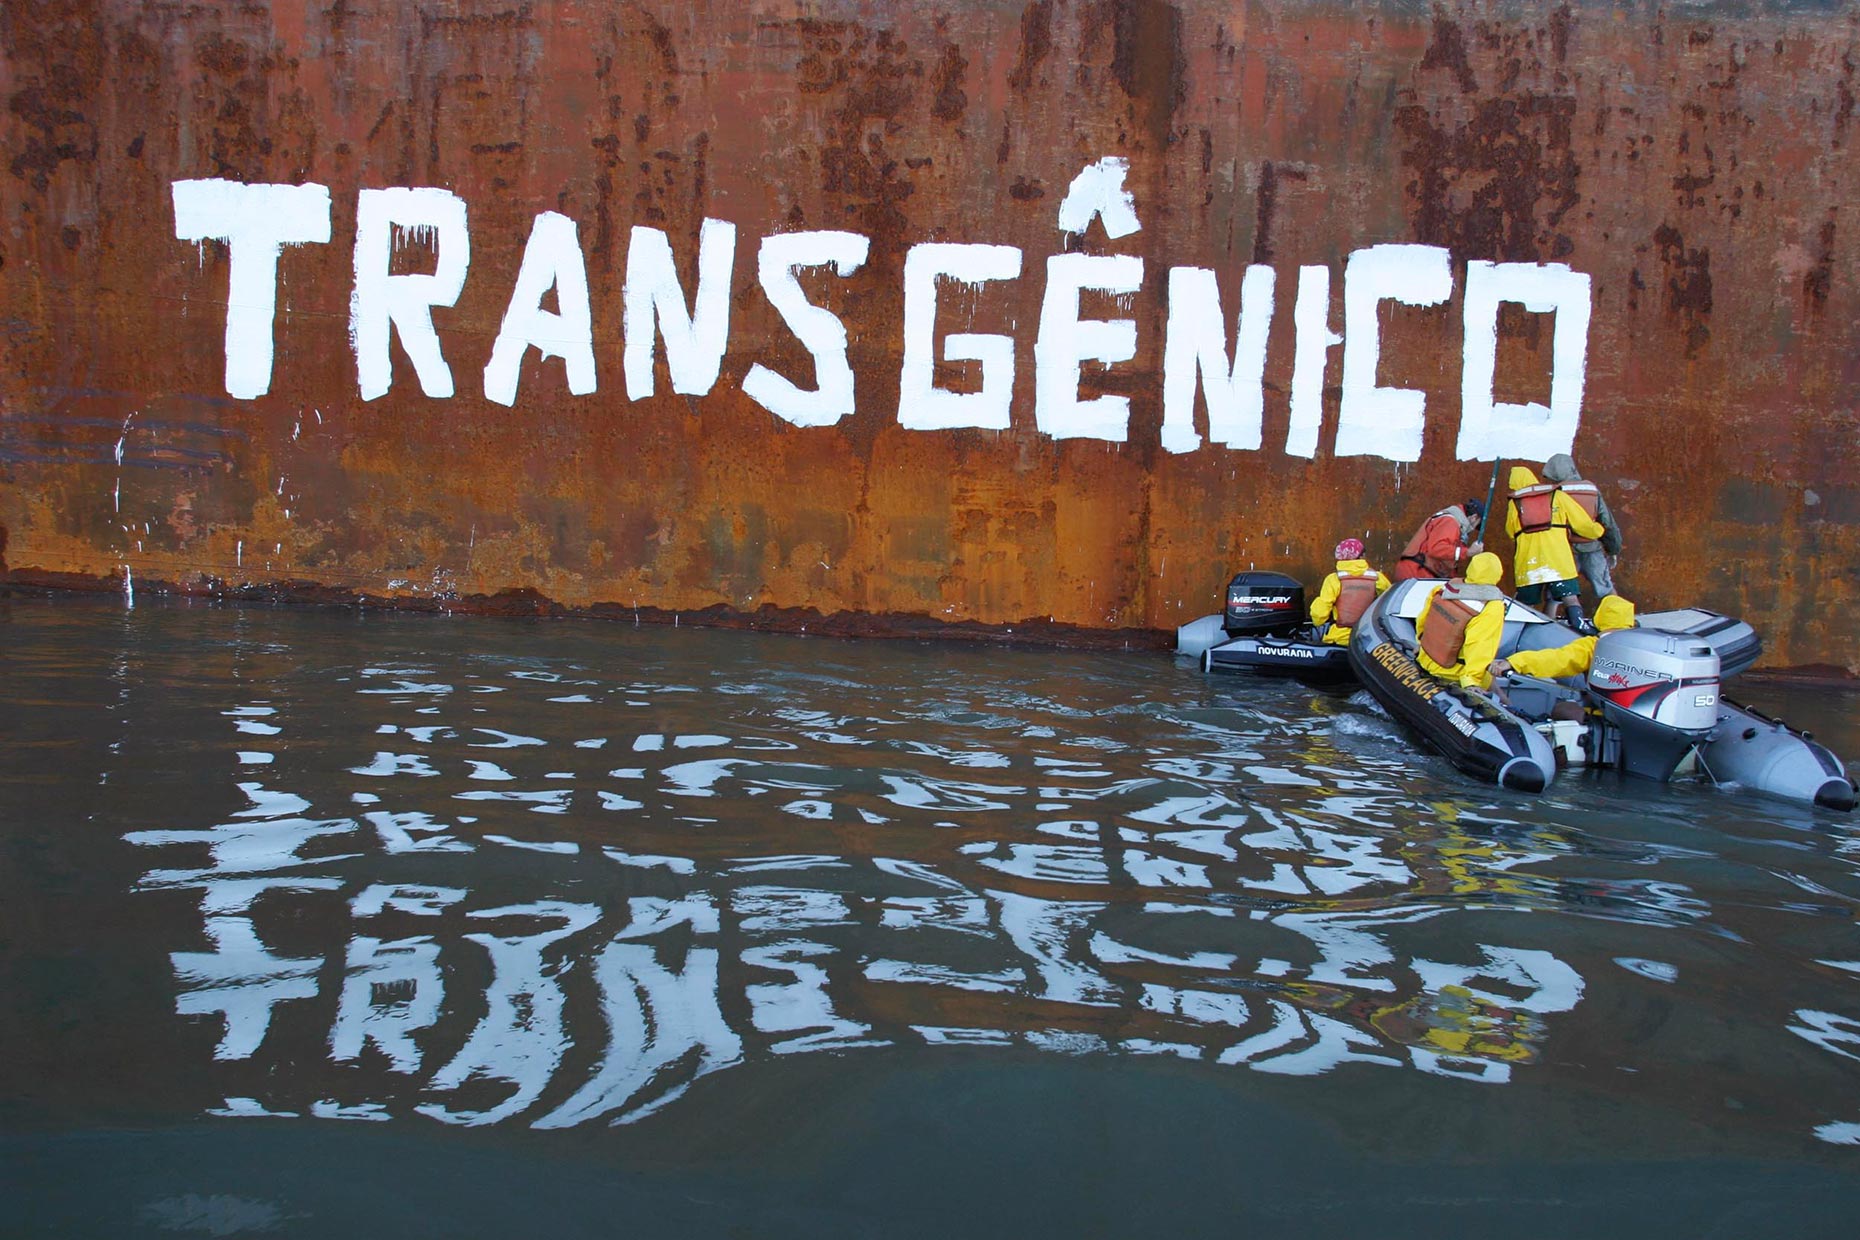 Genetically modified foods and soya, by Scotland Greenpeace photographer